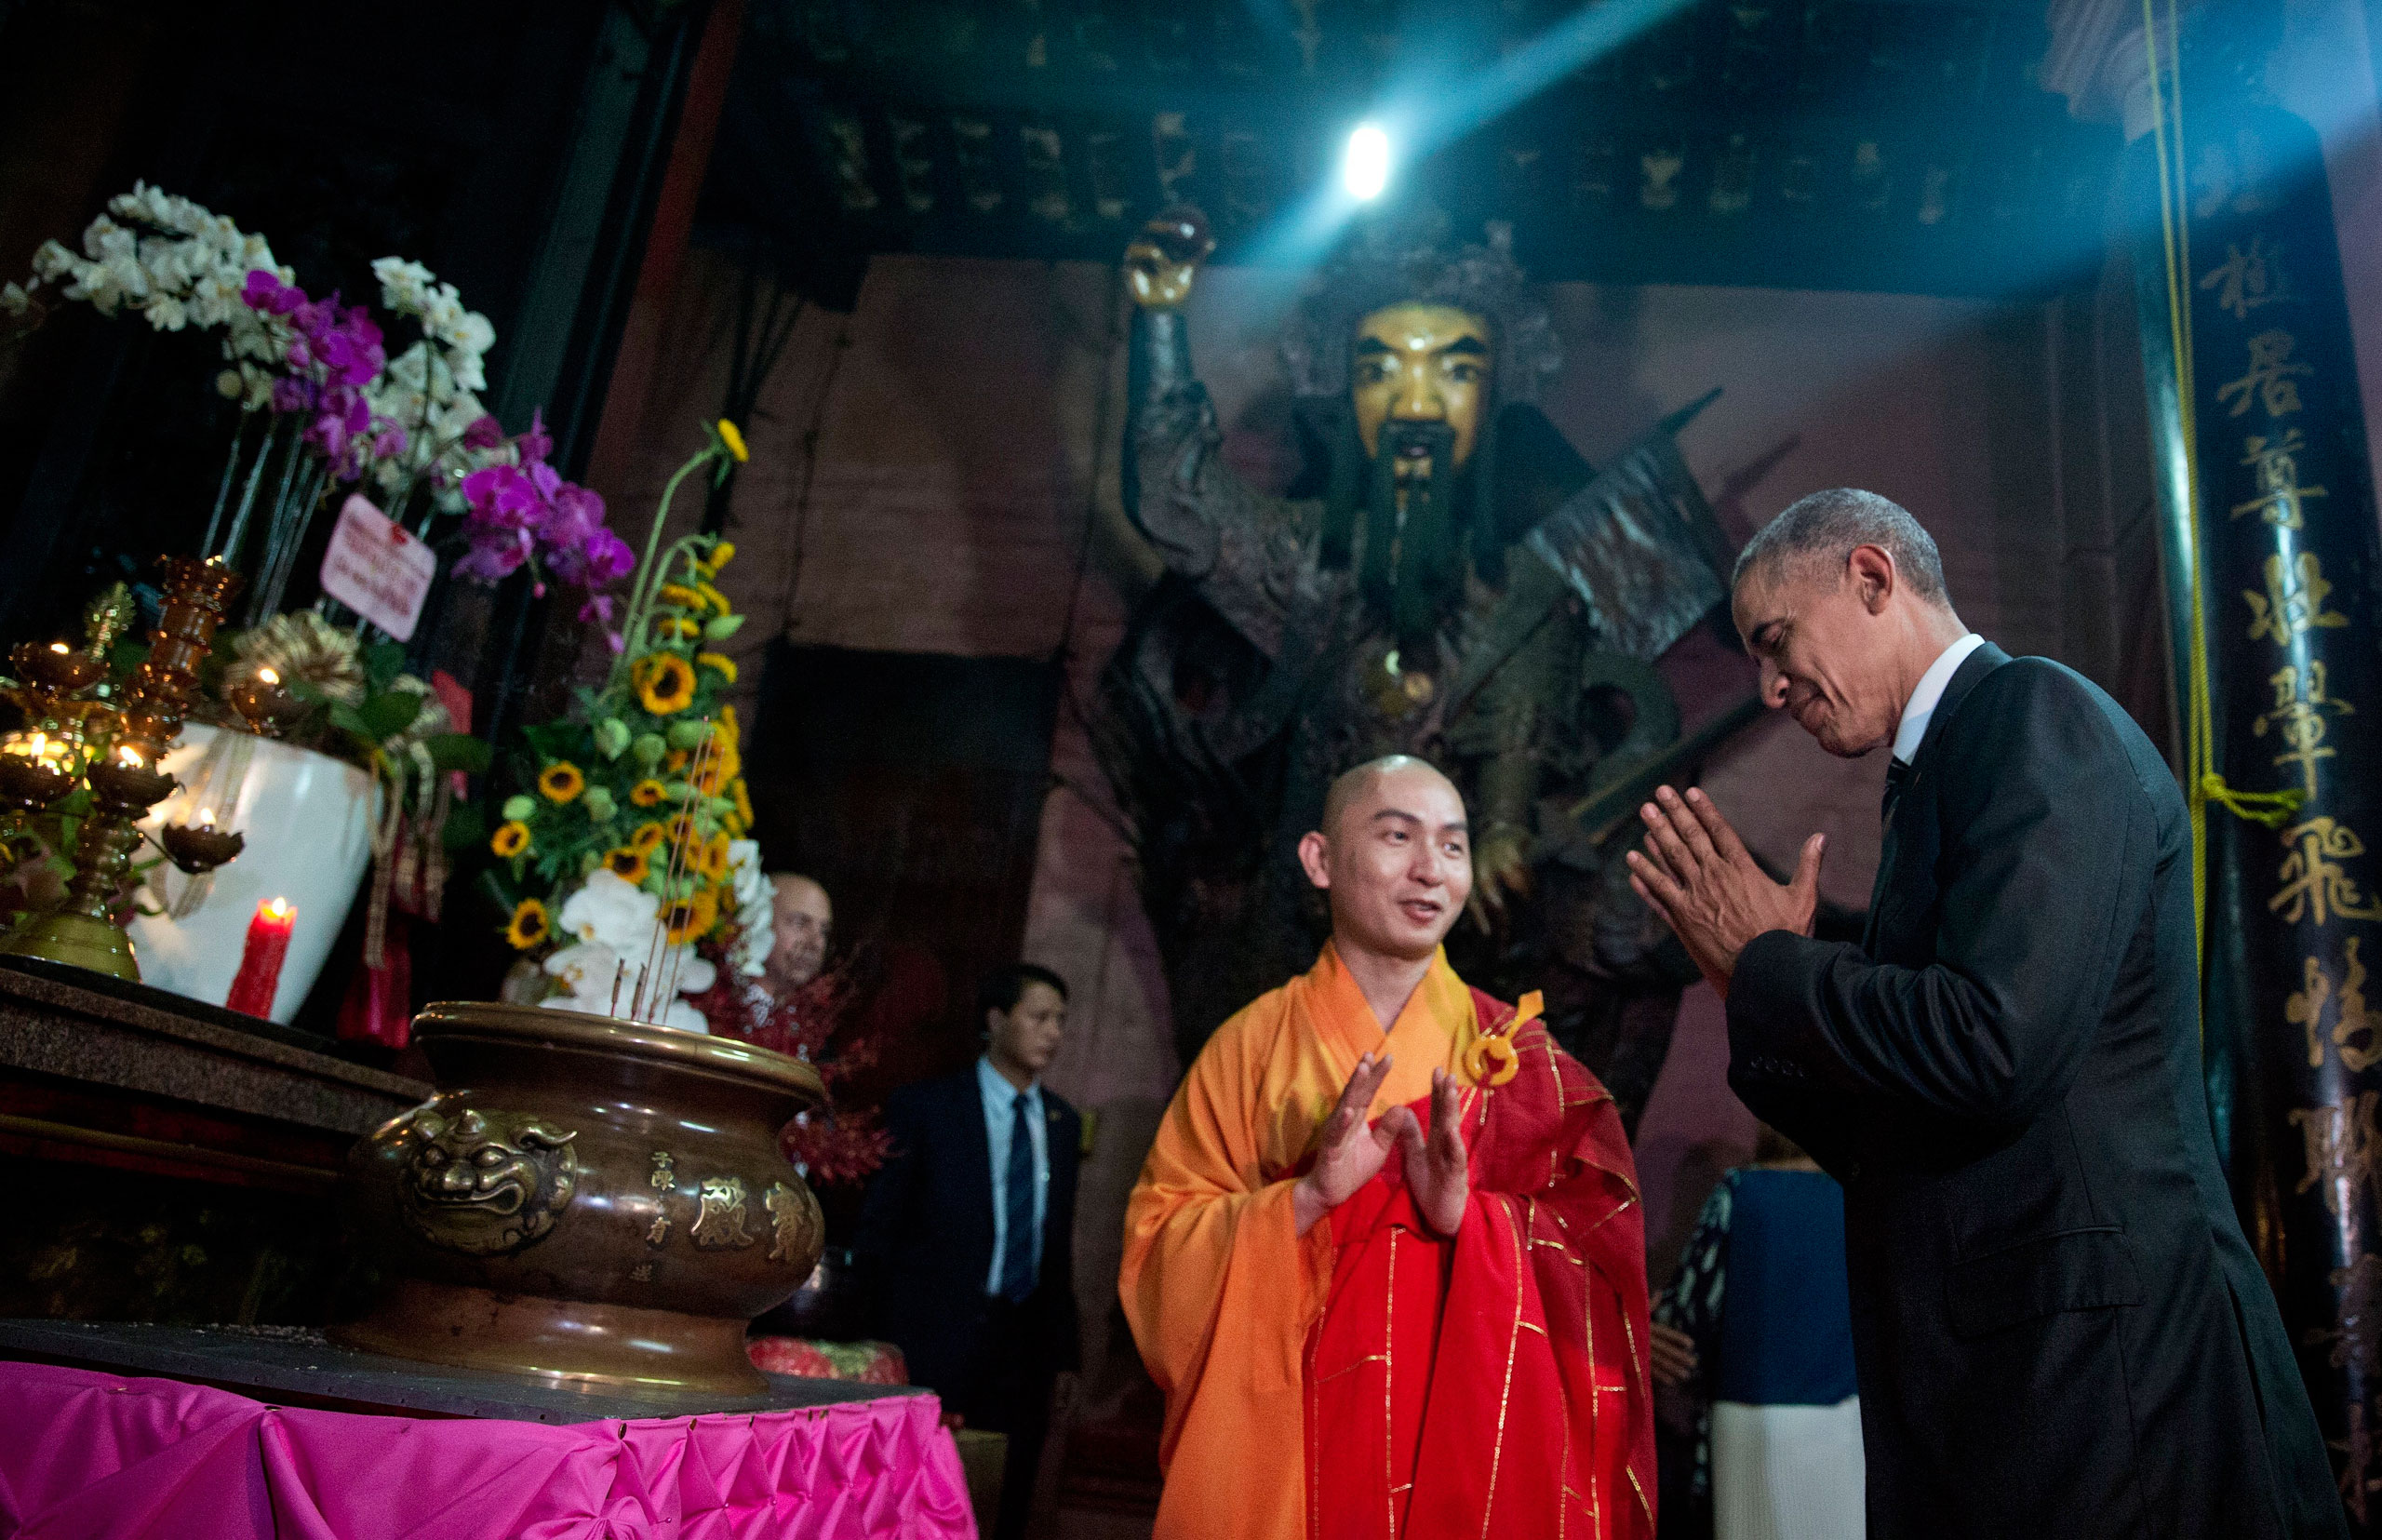 Obama visits the Jade Emperor Pagoda in Ho Chi Minh City on May 24, during a weeklong trip to Asia (Carolyn Kaster—AP)